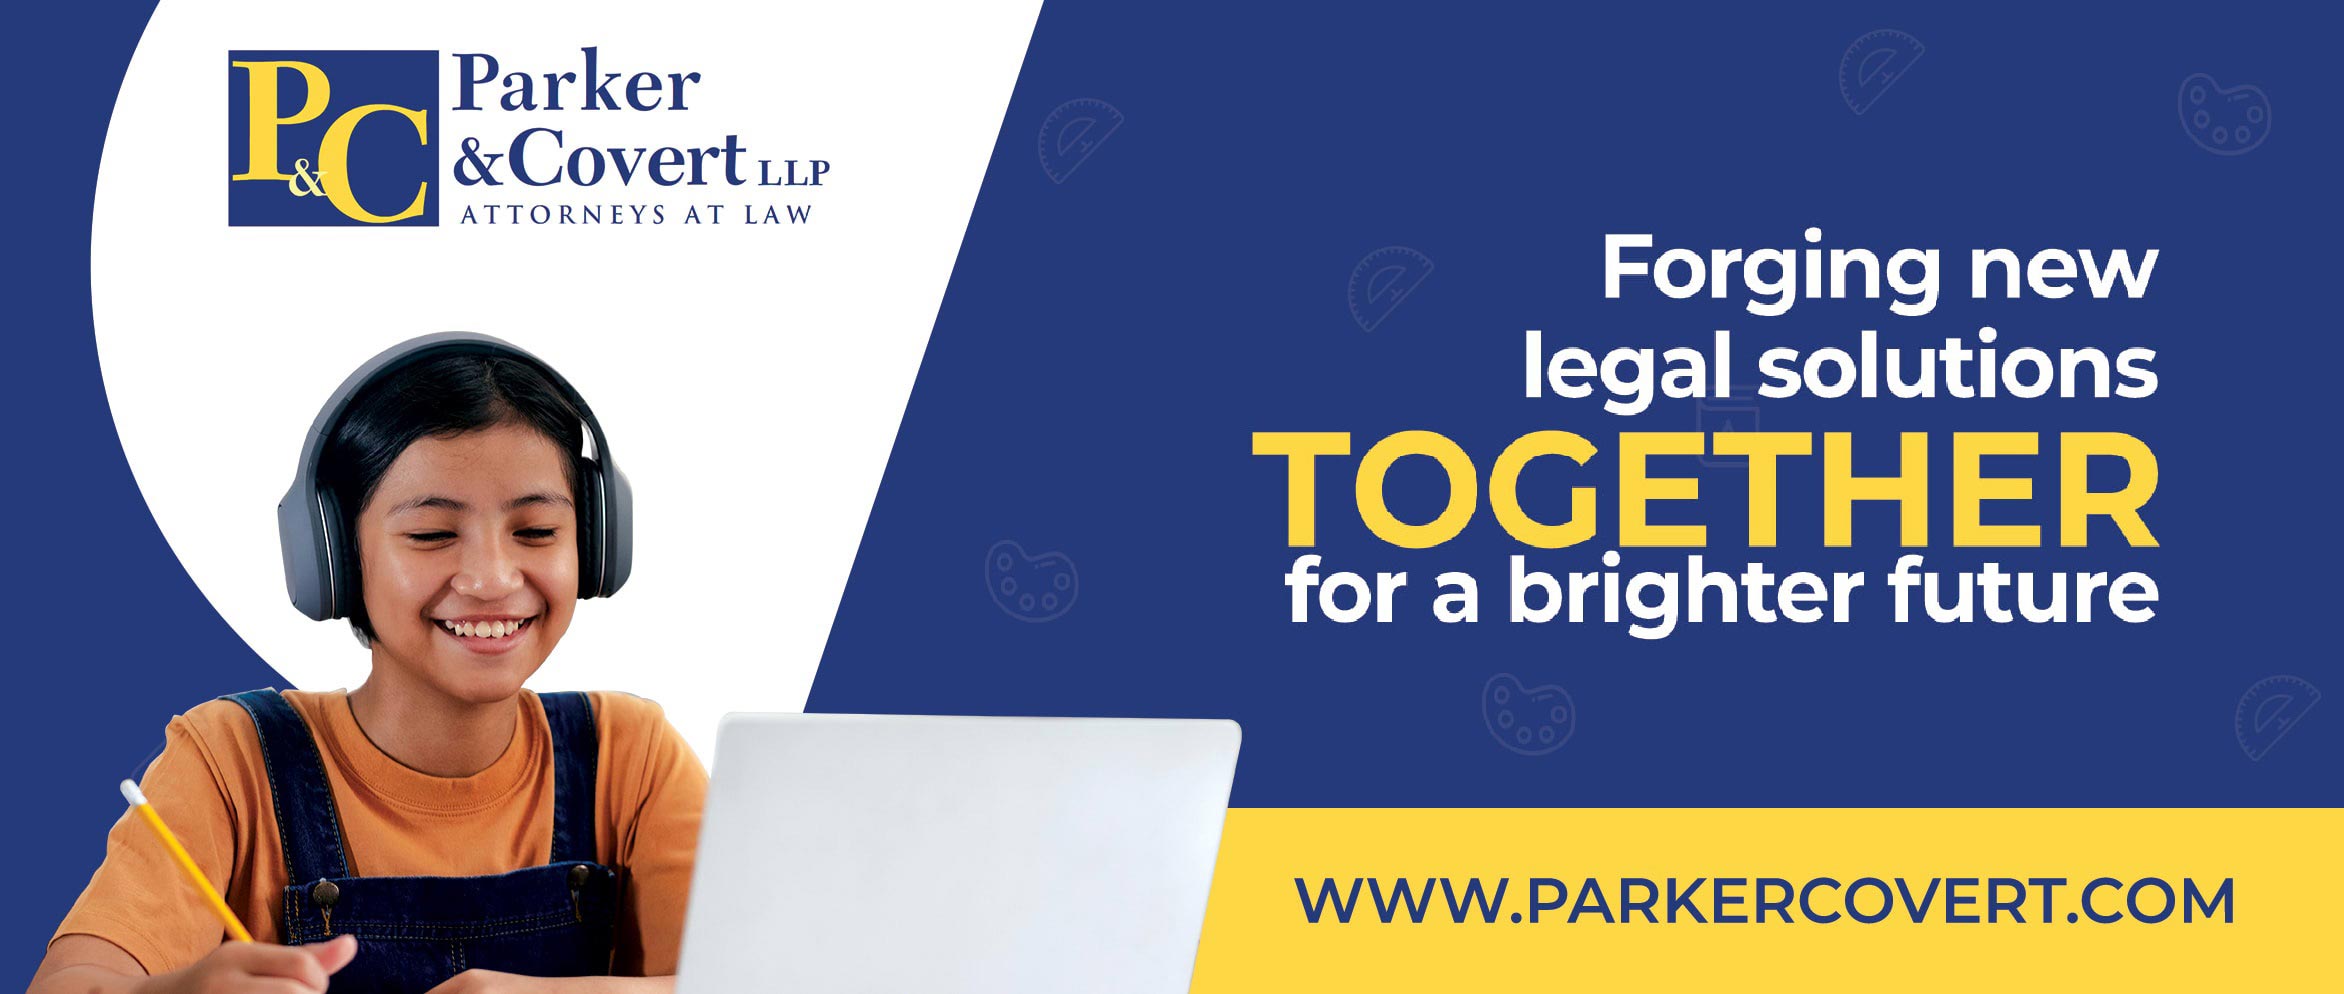 Parker & Covert LLP Attorneys at Law Advertisement